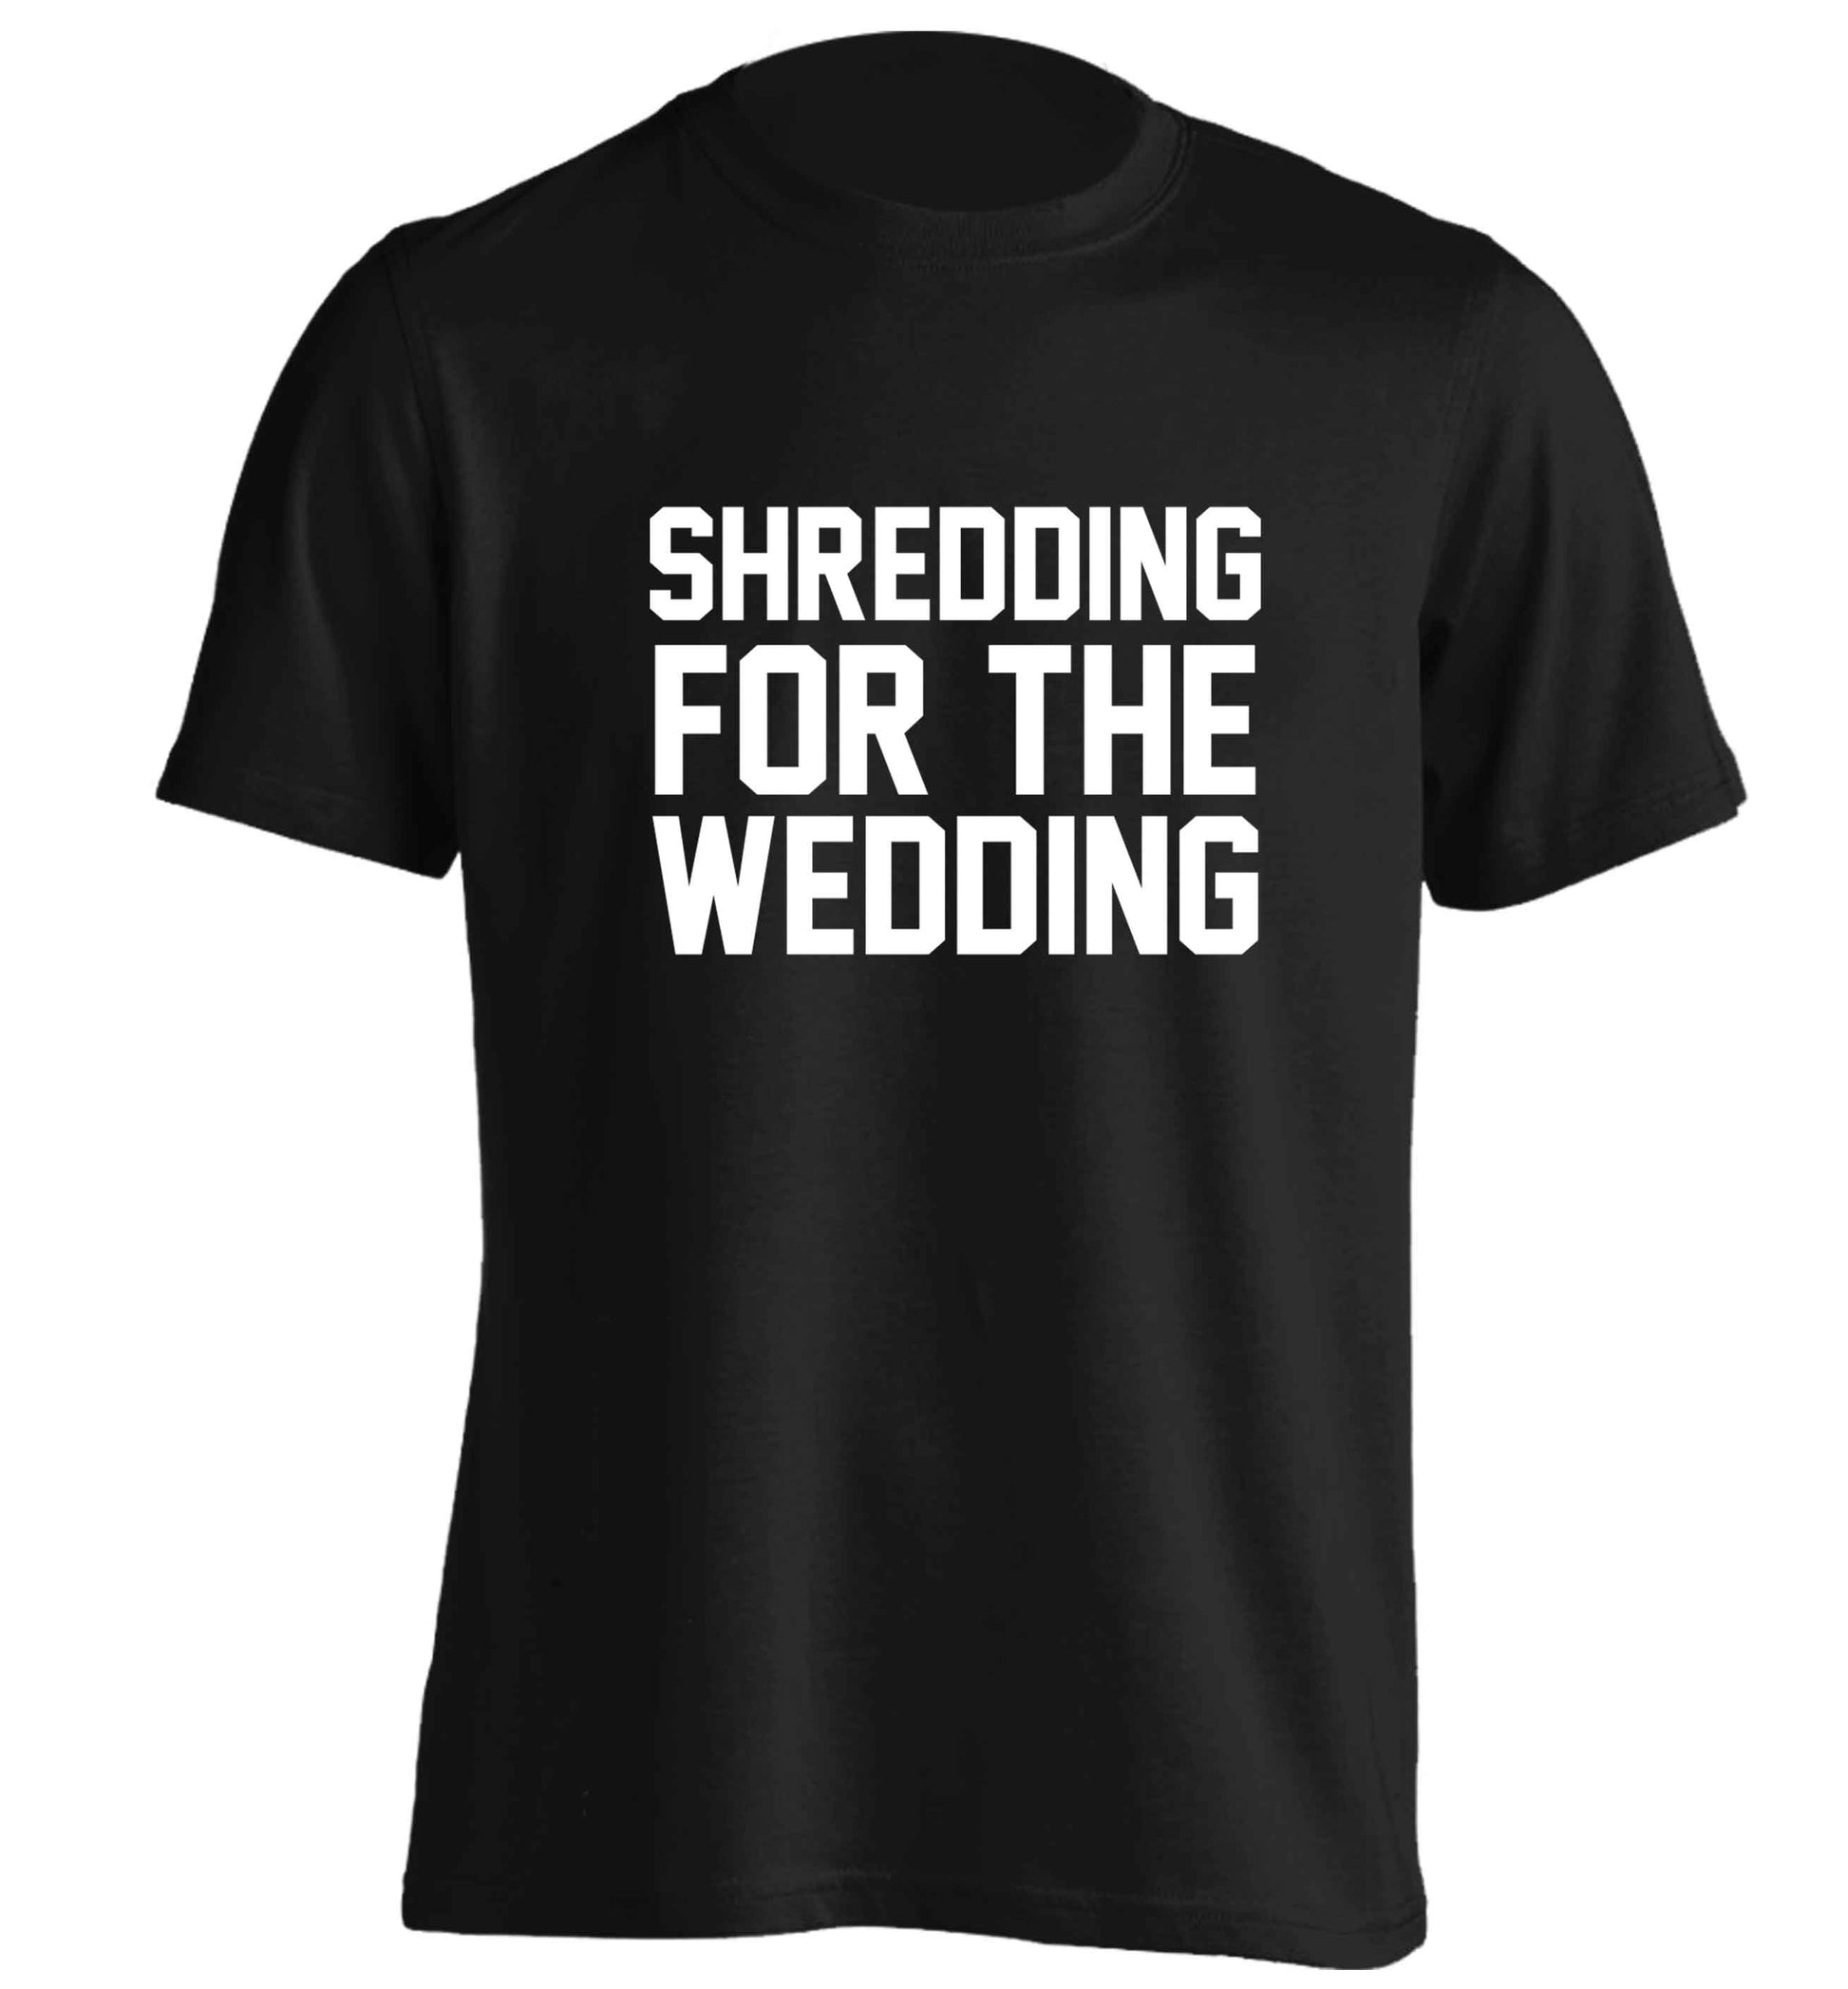 Get motivated and get fit for your big day! Our workout quotes and designs will get you ready to sweat! Perfect for any bride, groom or bridesmaid to be!  adults unisex black Tshirt 2XL